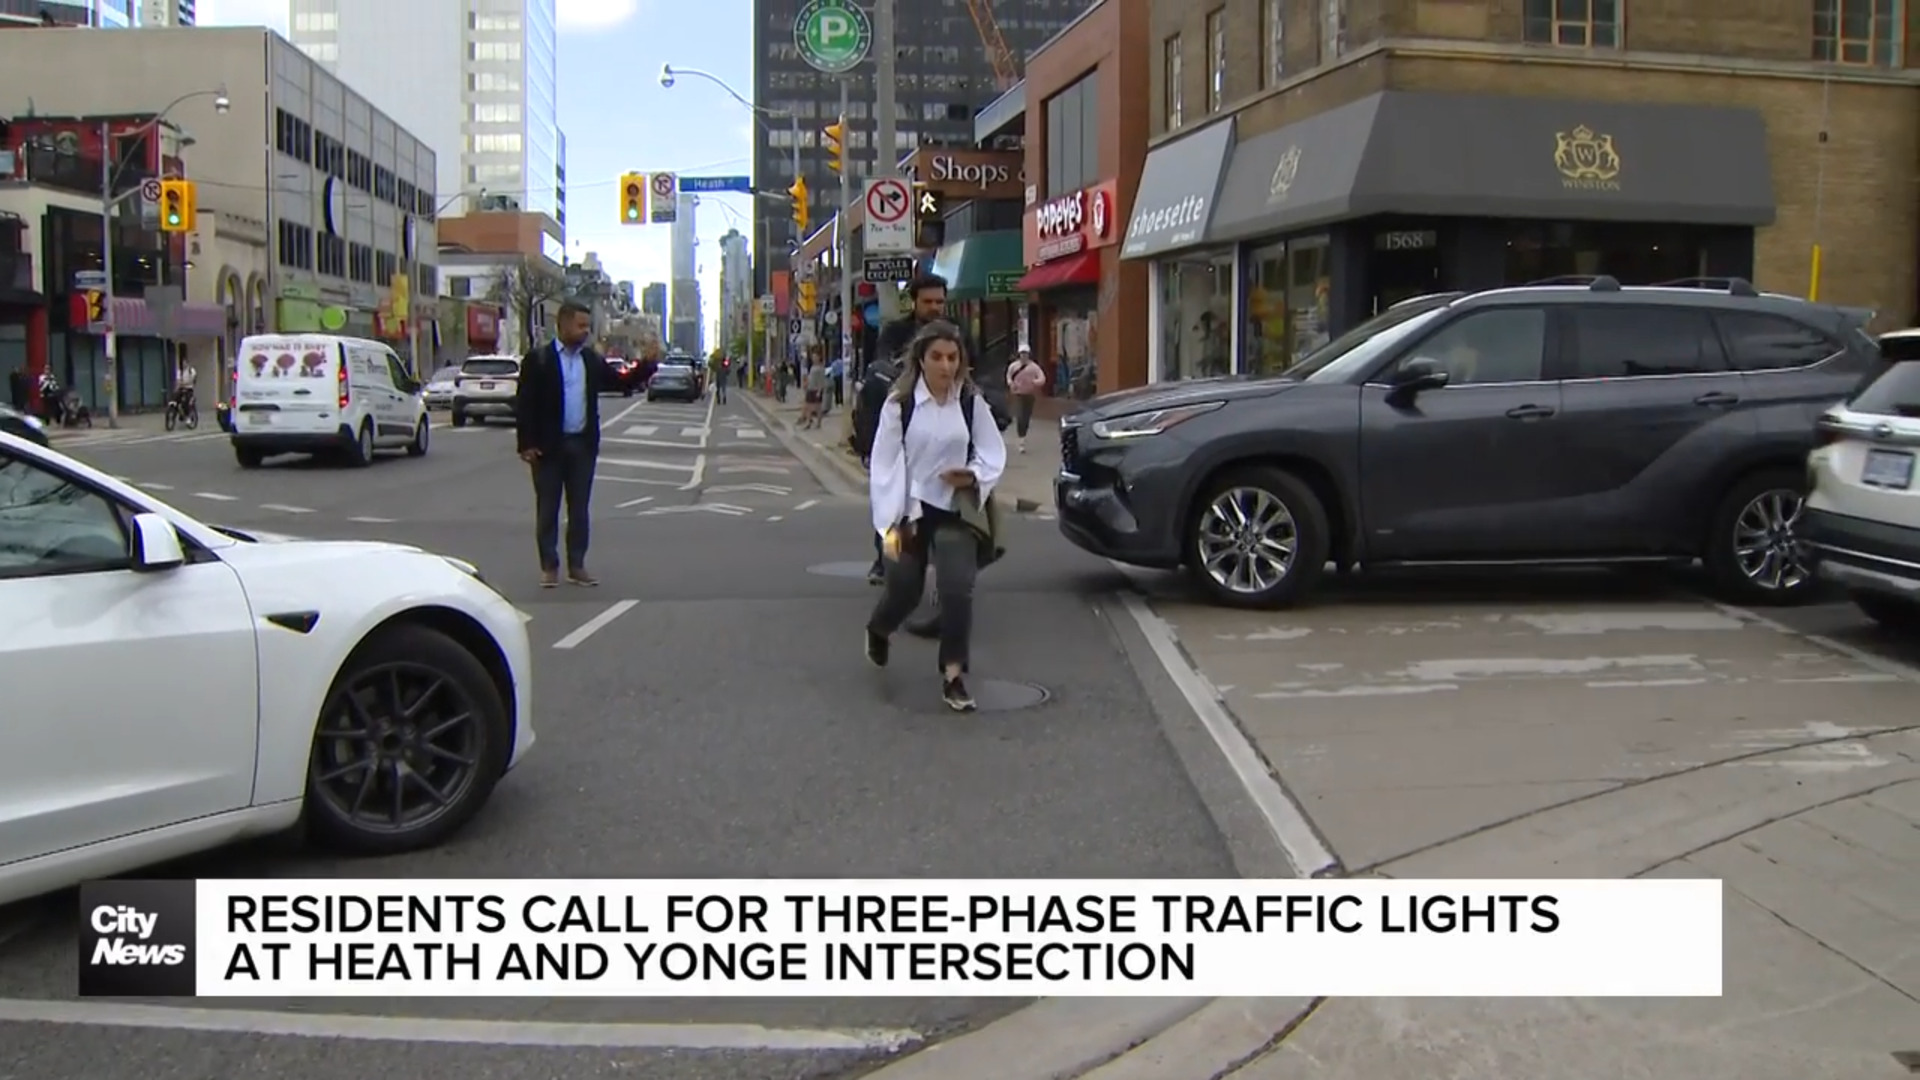 Residents call for three-phase traffic lights at Heath and Yonge Intersection